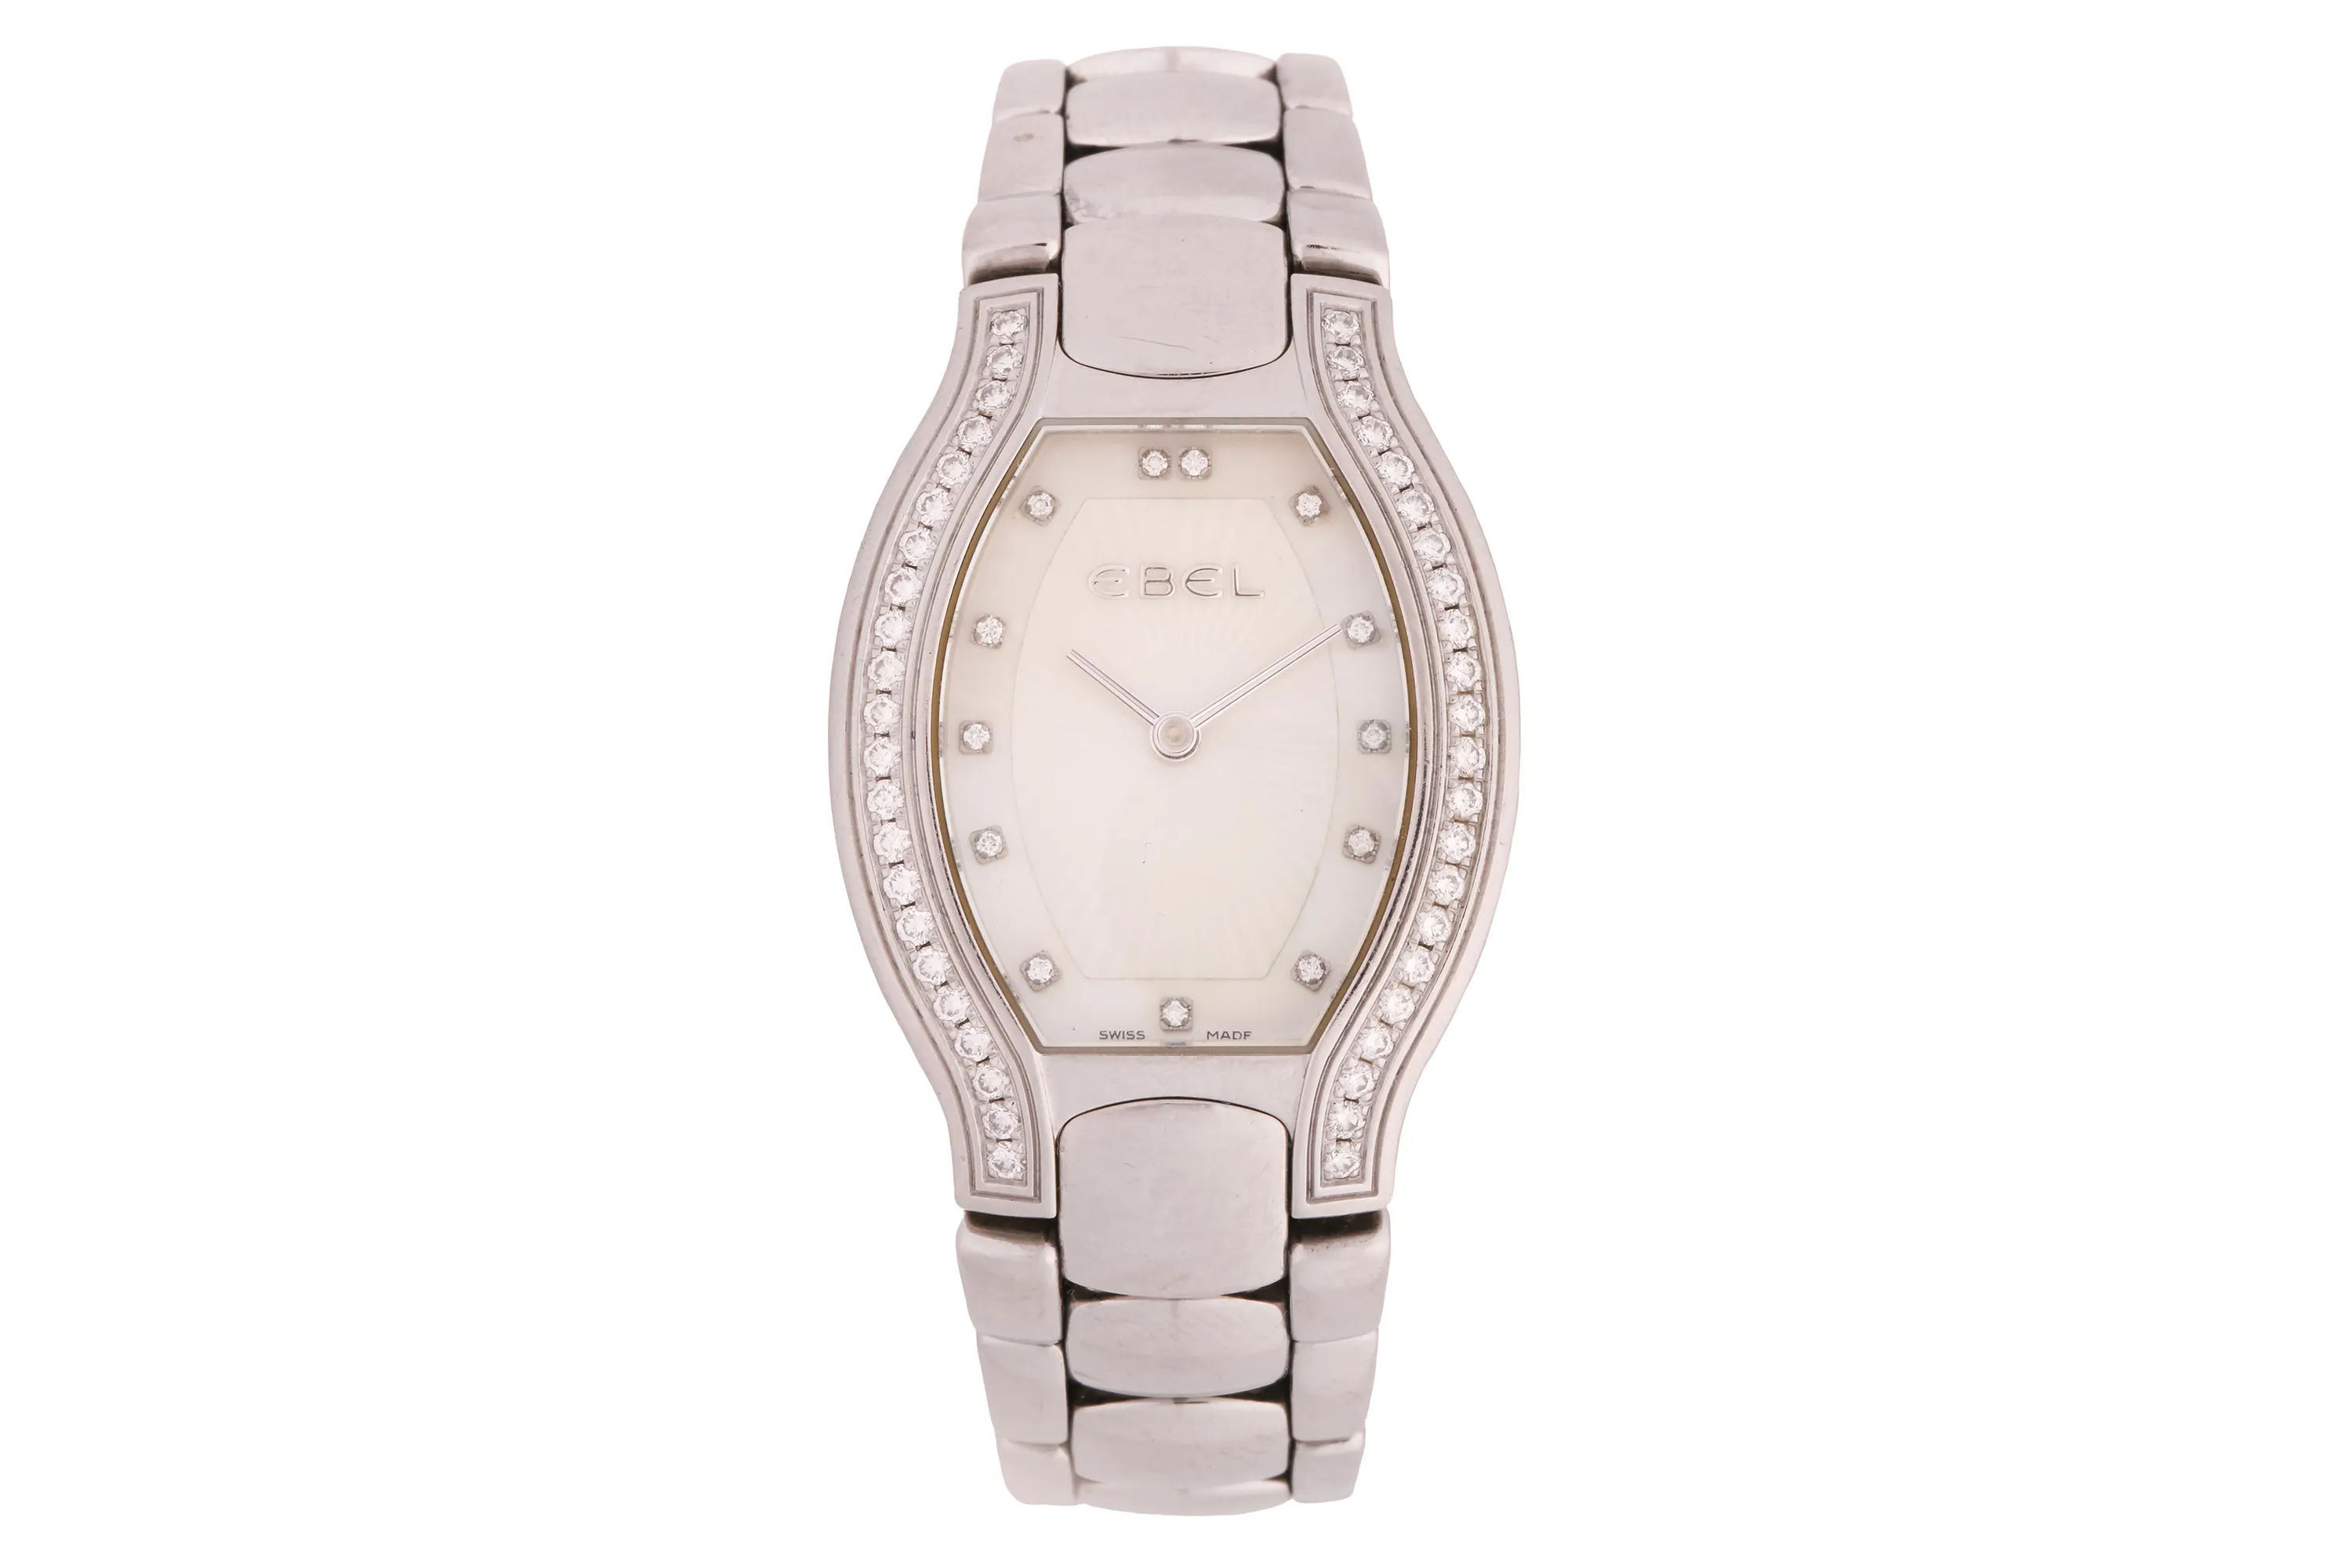 Ebel Beluga A024756 29mm Stainess steel & diamond Mother-of-pearl